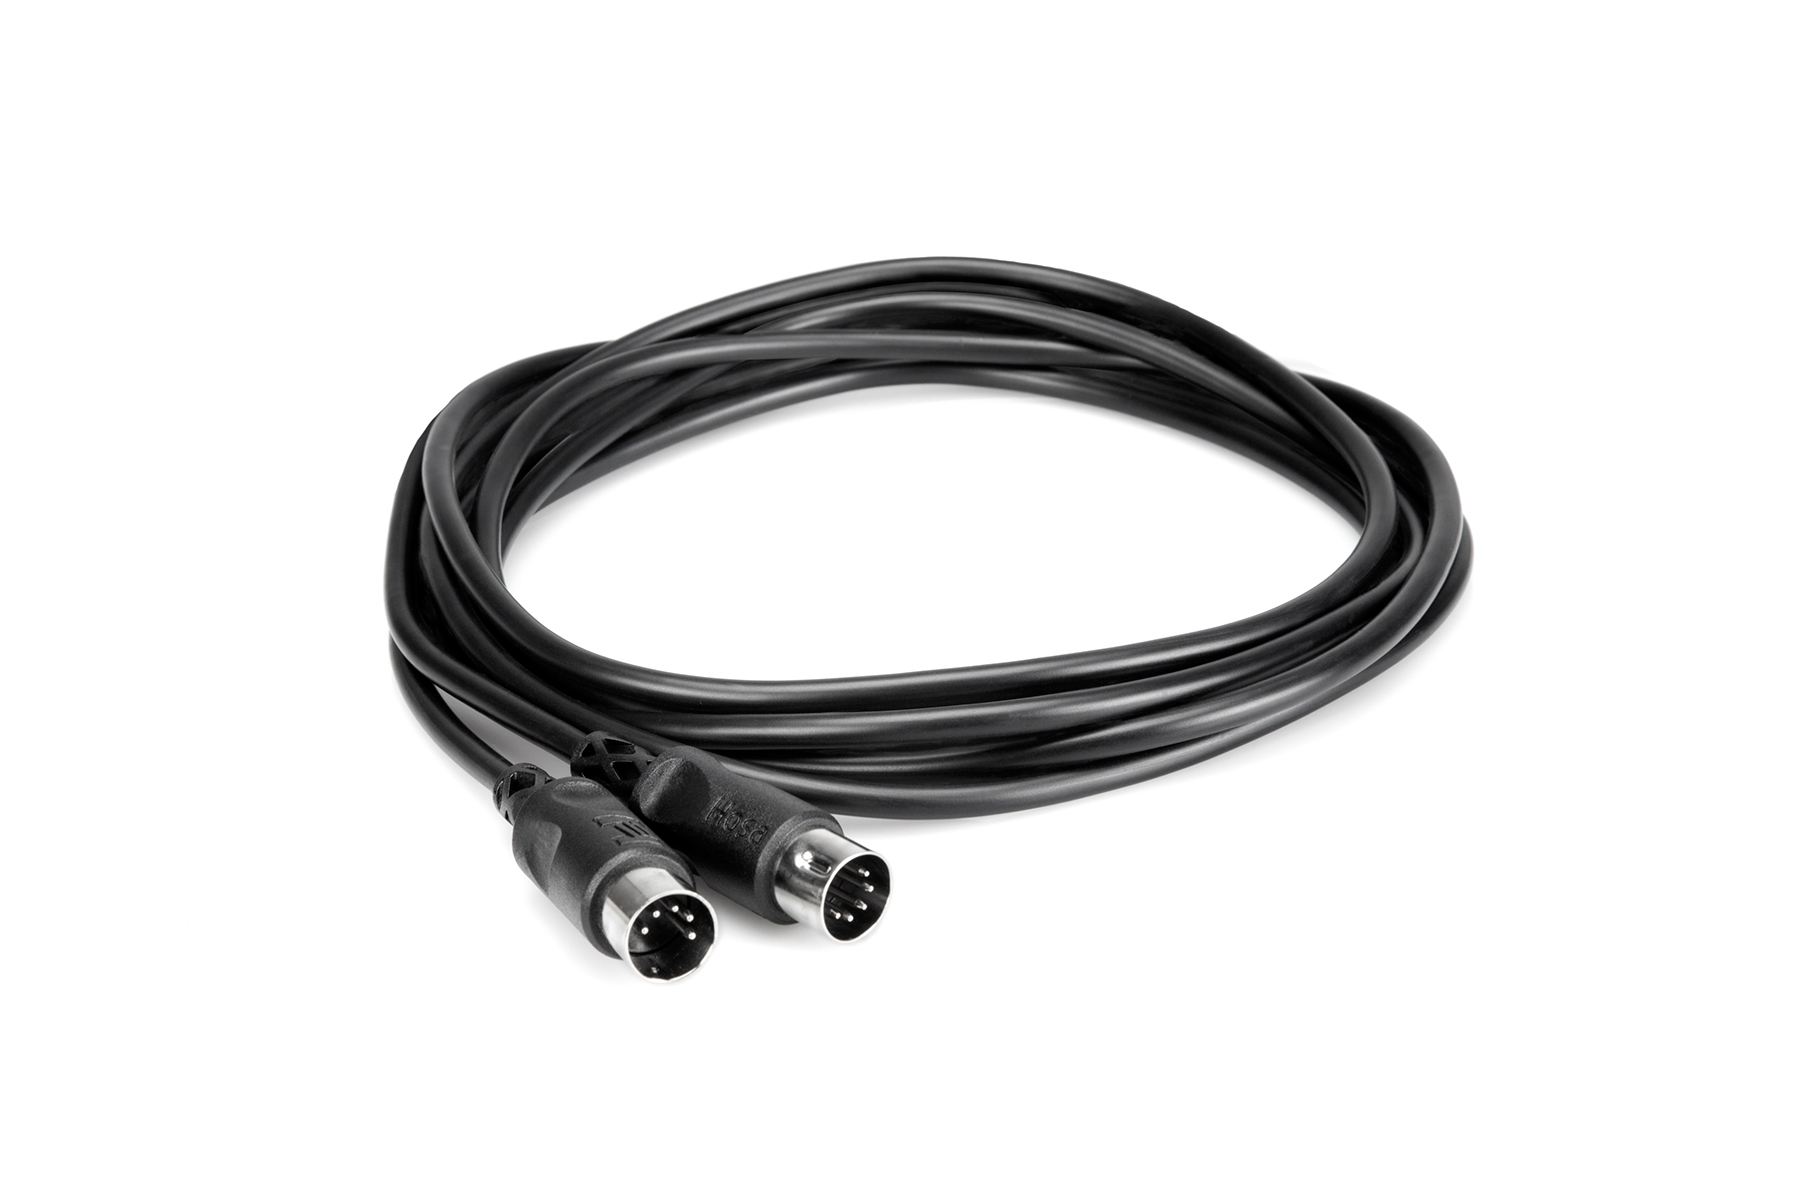 Hosa MID-515 Pro MIDI Cable Serviceable 5-pin DIN to Same 15 ft EMI RFI OFC 